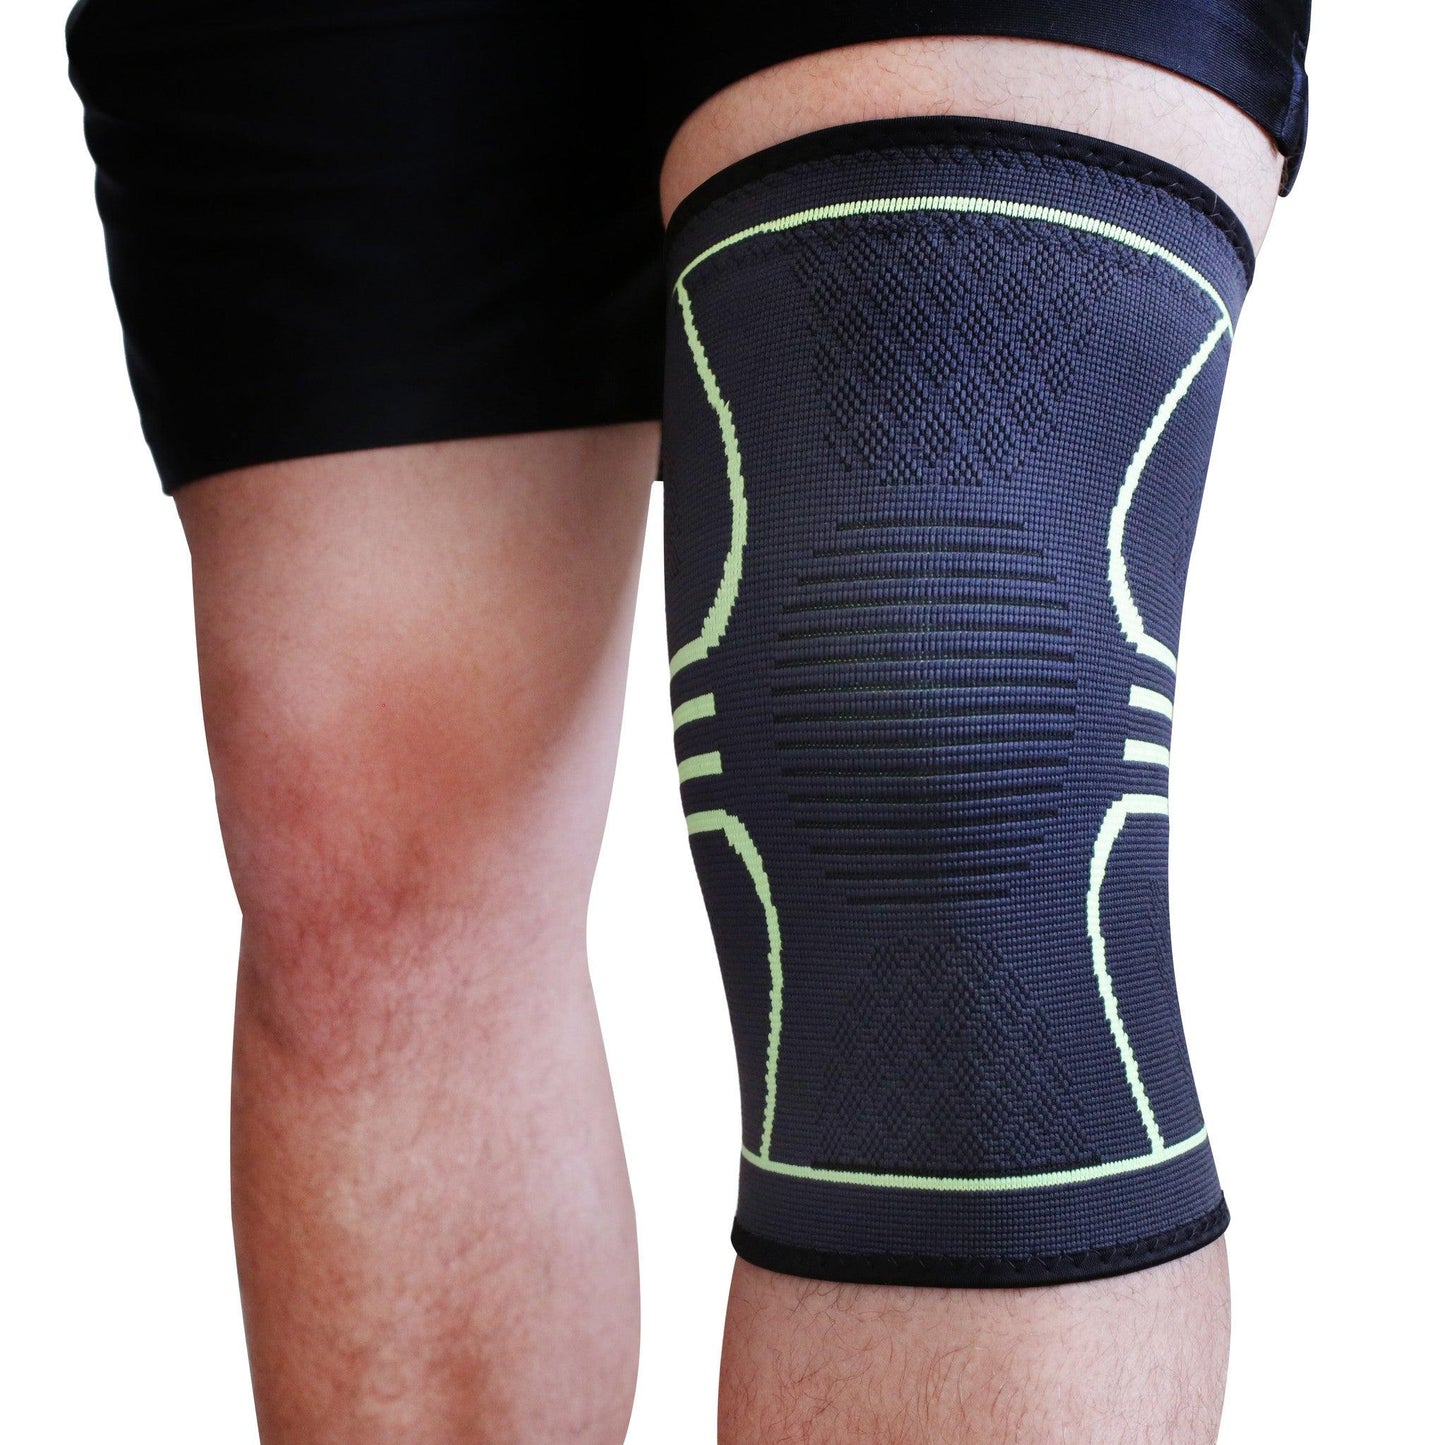 Knee brace (8 photos) - Photography and Web Design - Los Angeles, US based Shopify Experts Revo Designs